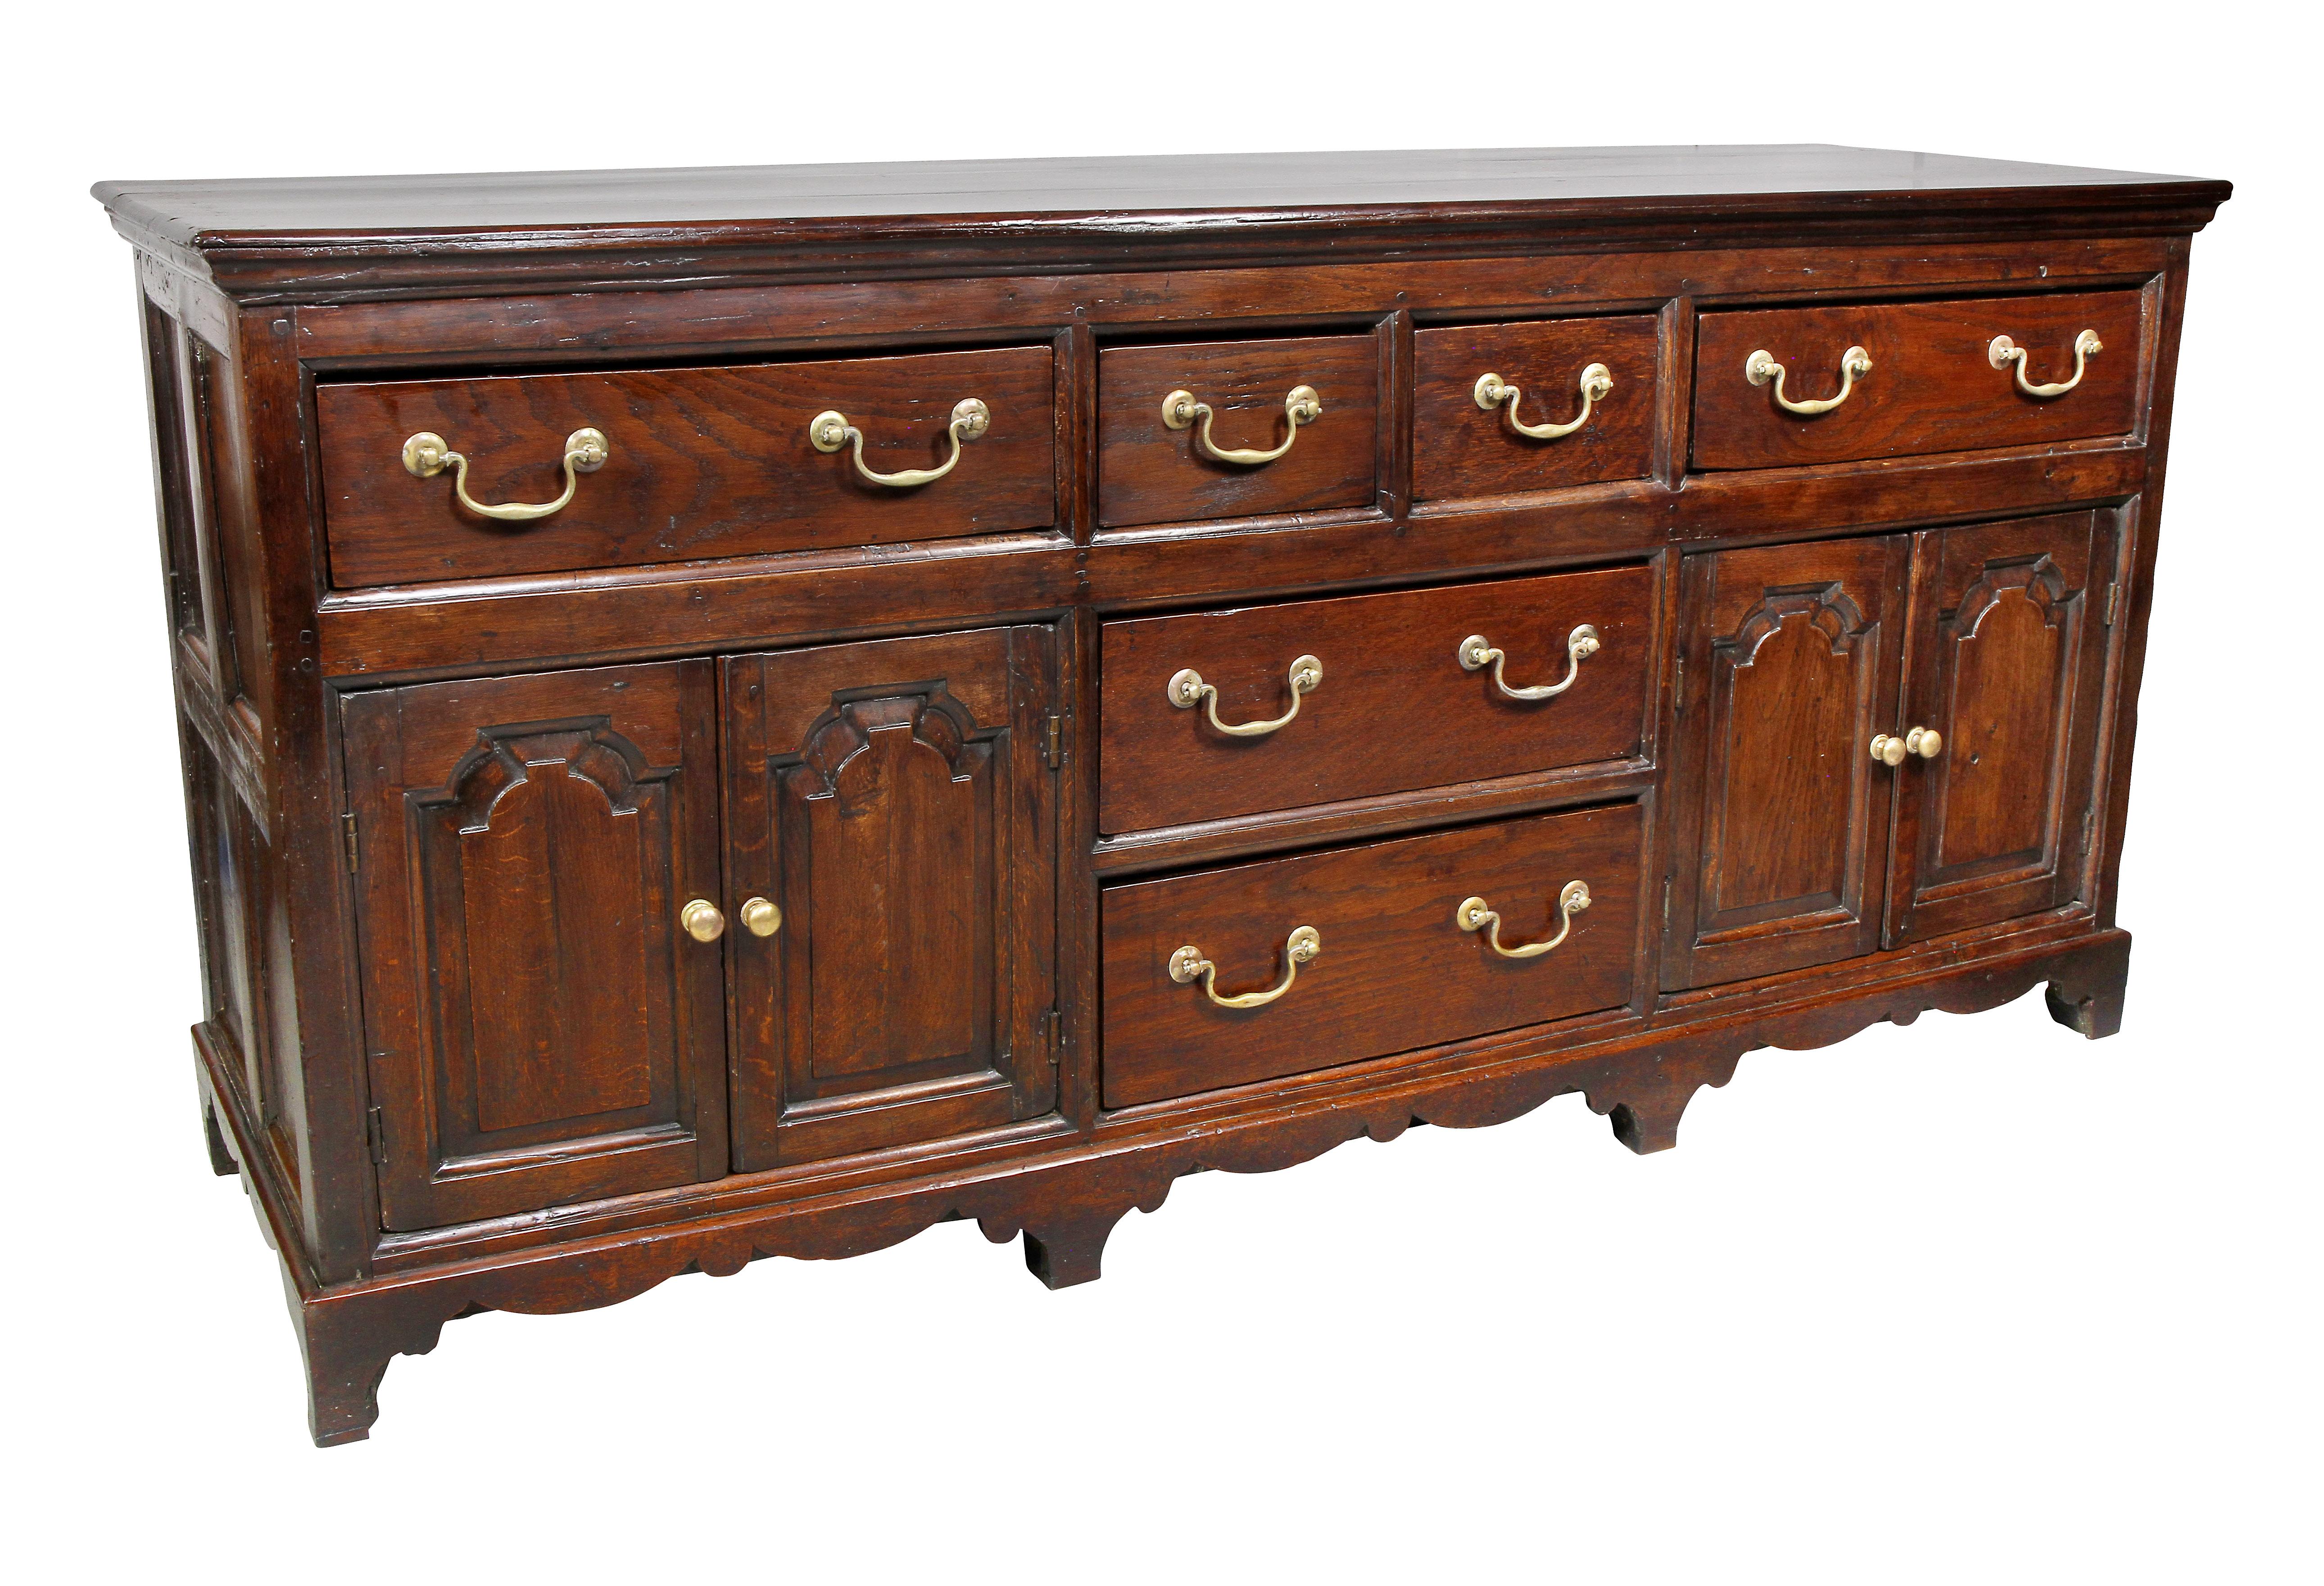 Rectangular top over four drawers over two drawers flanked by a pair of cabinet doors. Estate of John Volk, Palm Beach Fl.